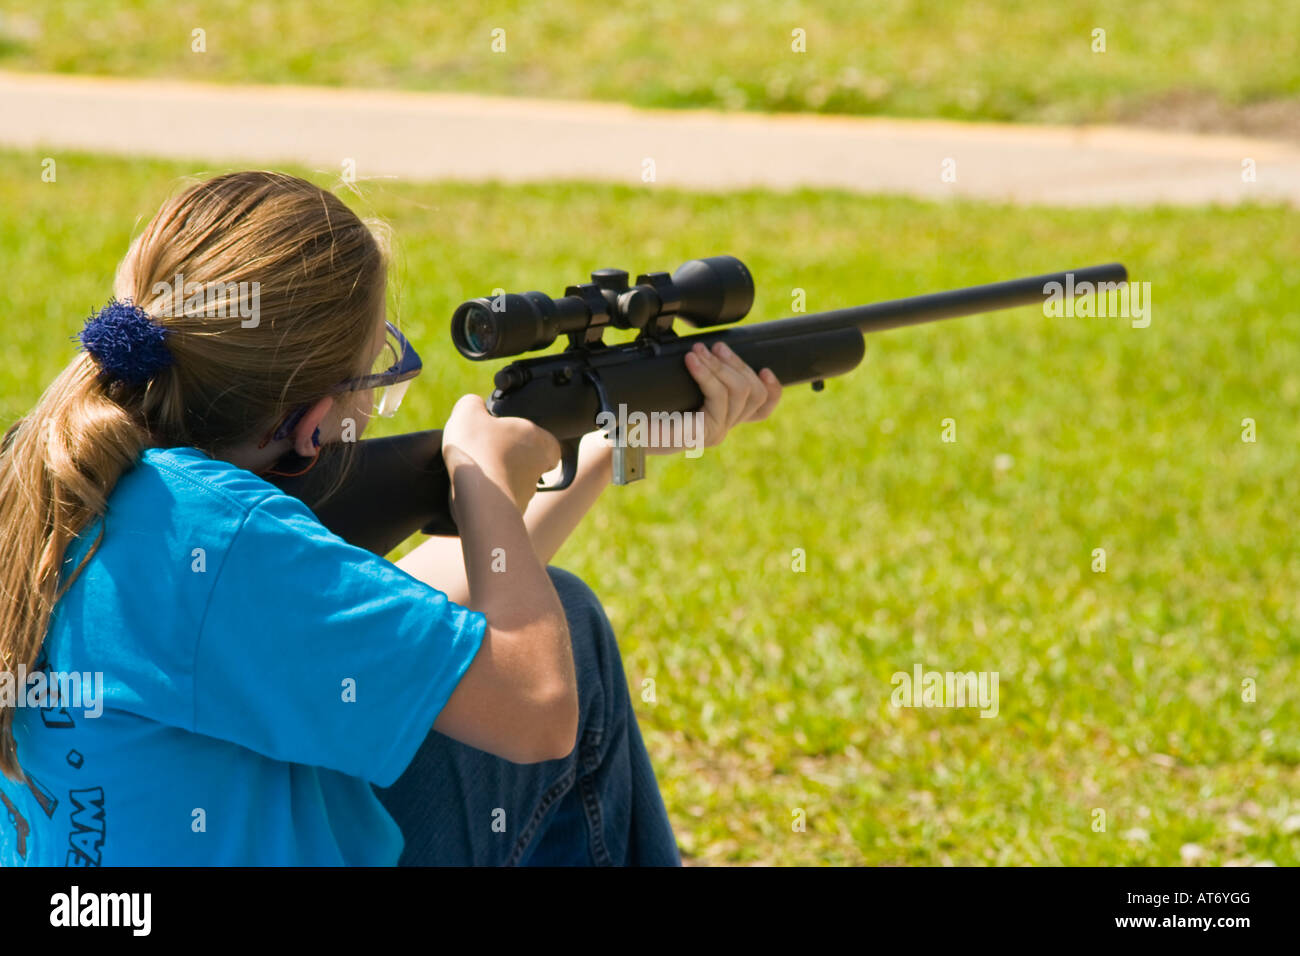 Girl shooting at 4-h event field and stream shooting sports Stock Photo